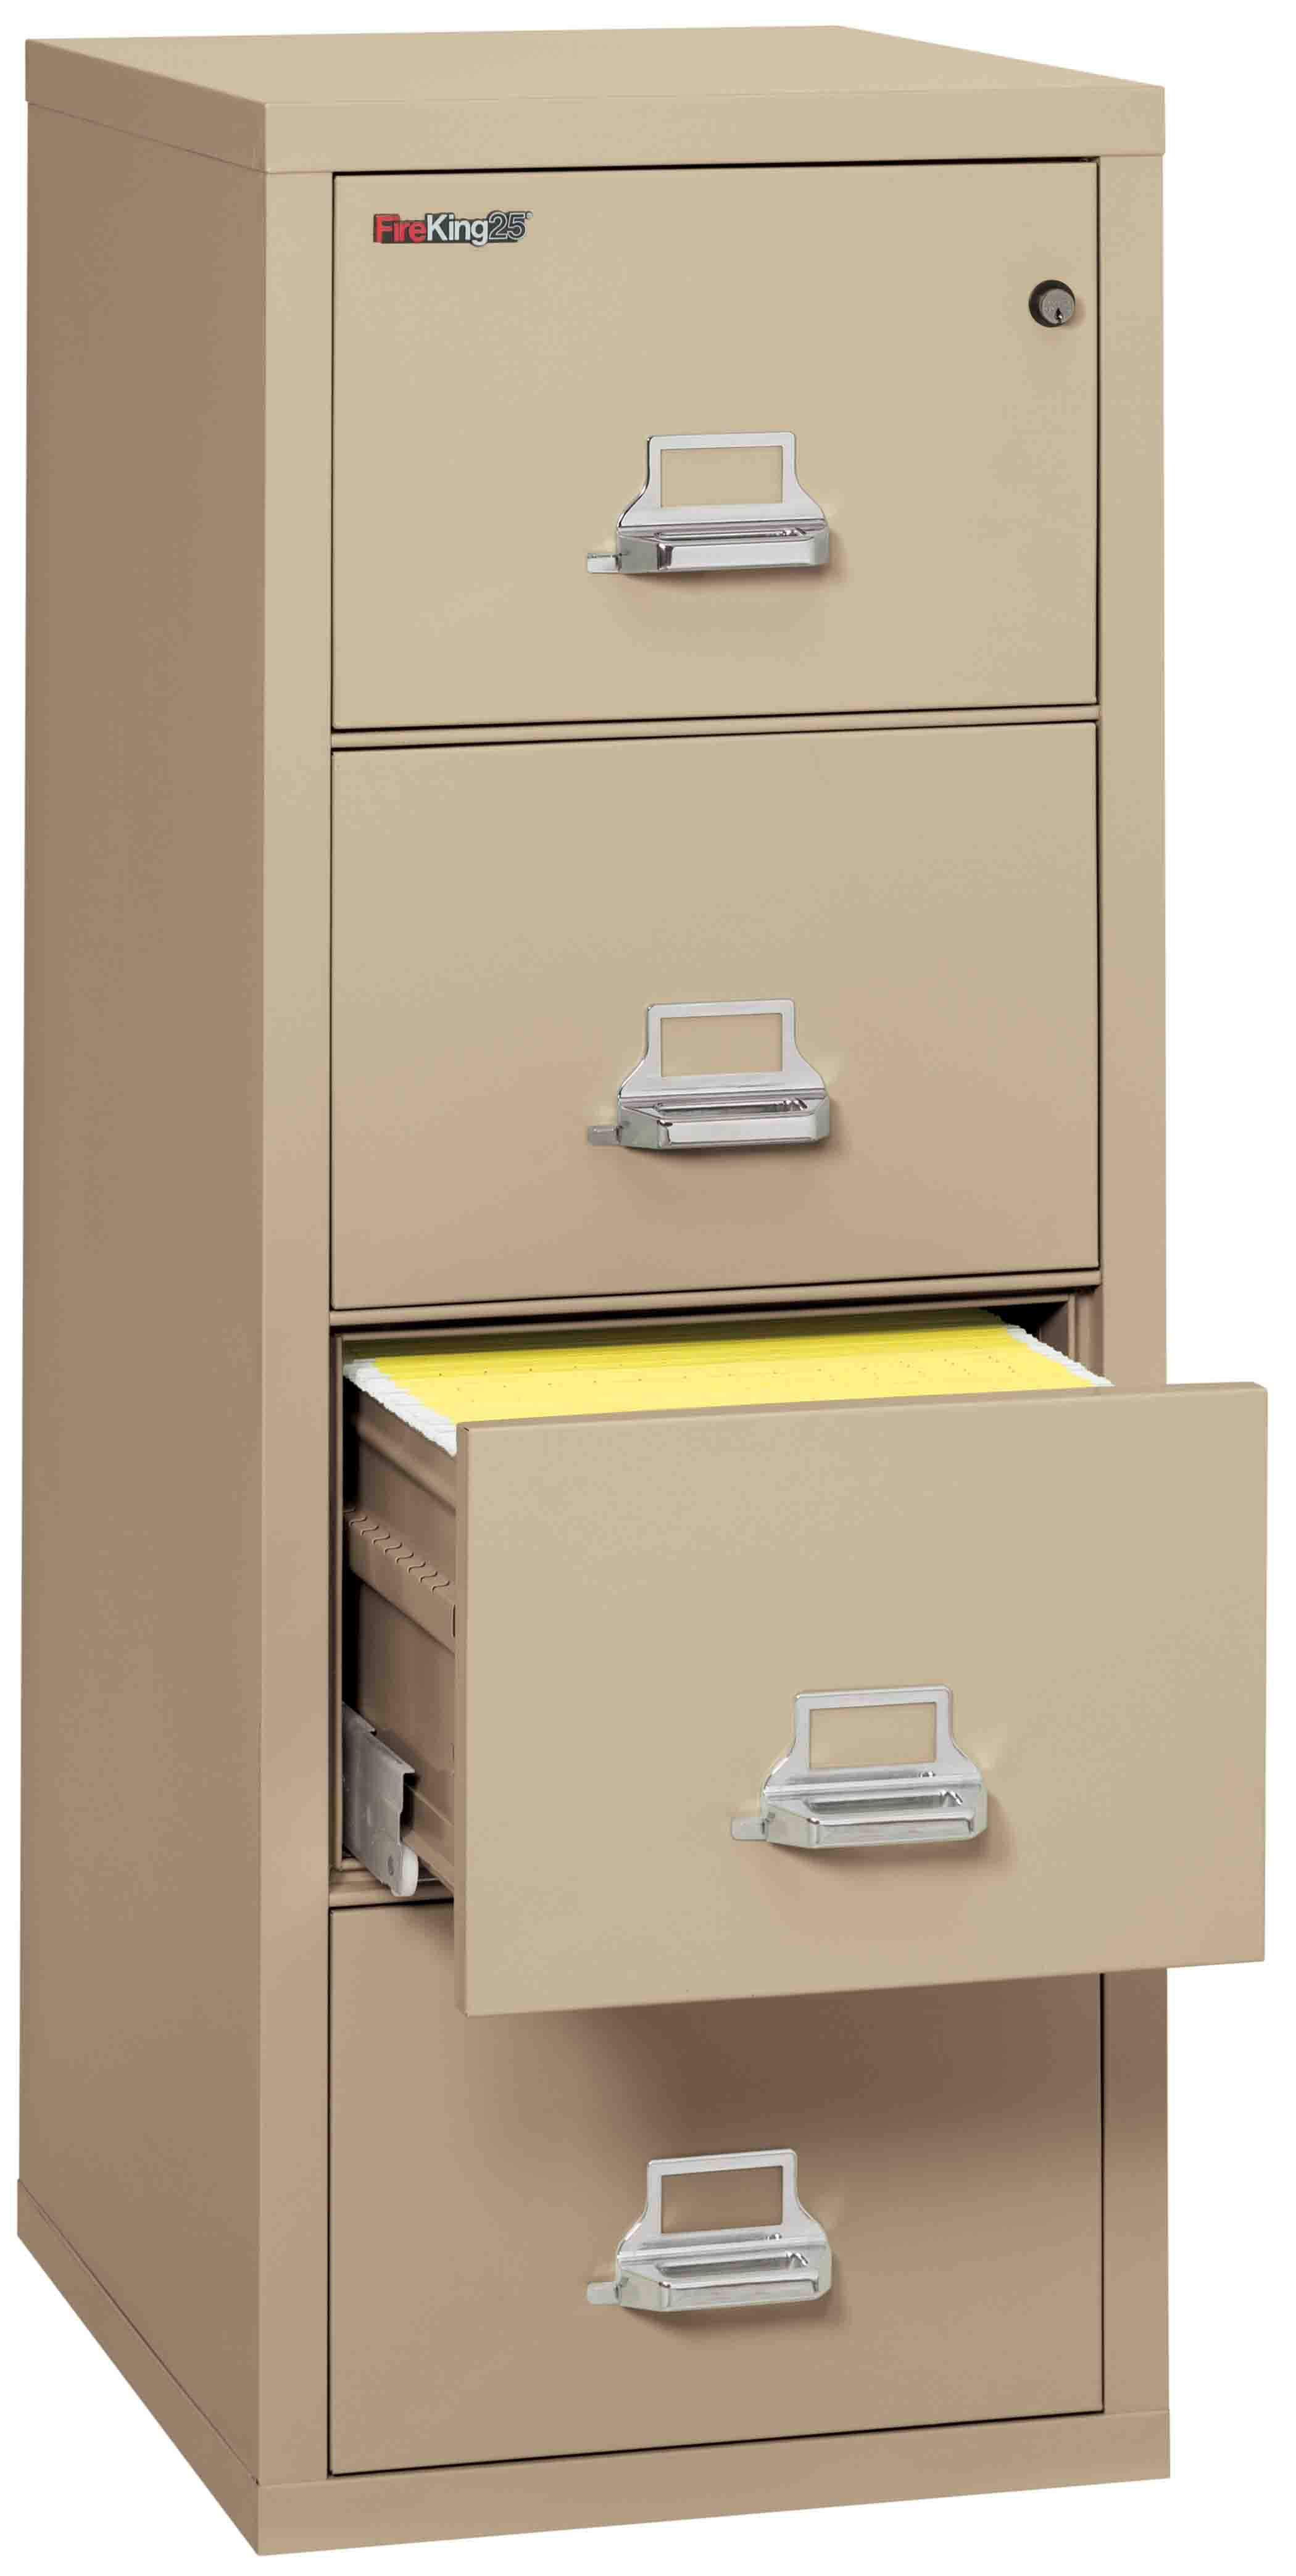 Fire King 4 1825 C Fireking 25 File Cabinets 4 Drawer 1 Hour Fire intended for dimensions 2100 X 4174